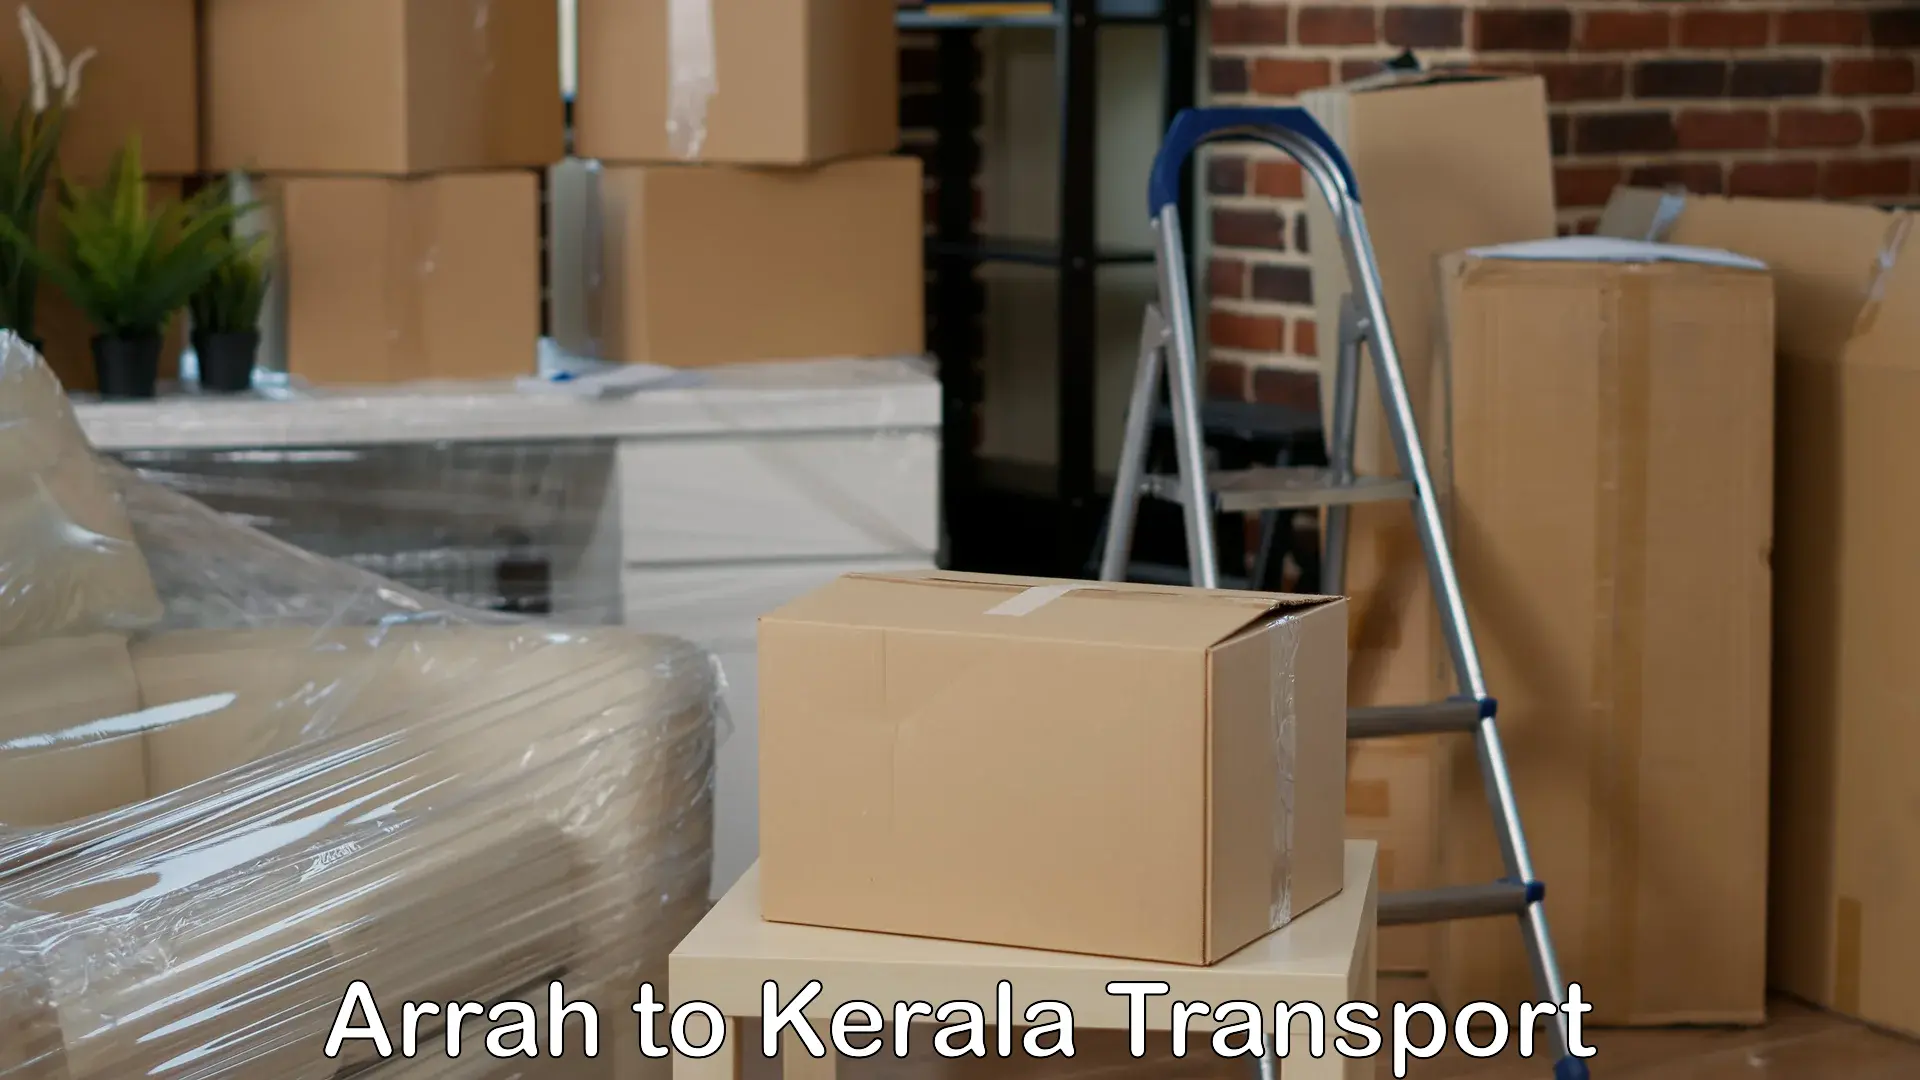 Transport services Arrah to Cochin University of Science and Technology